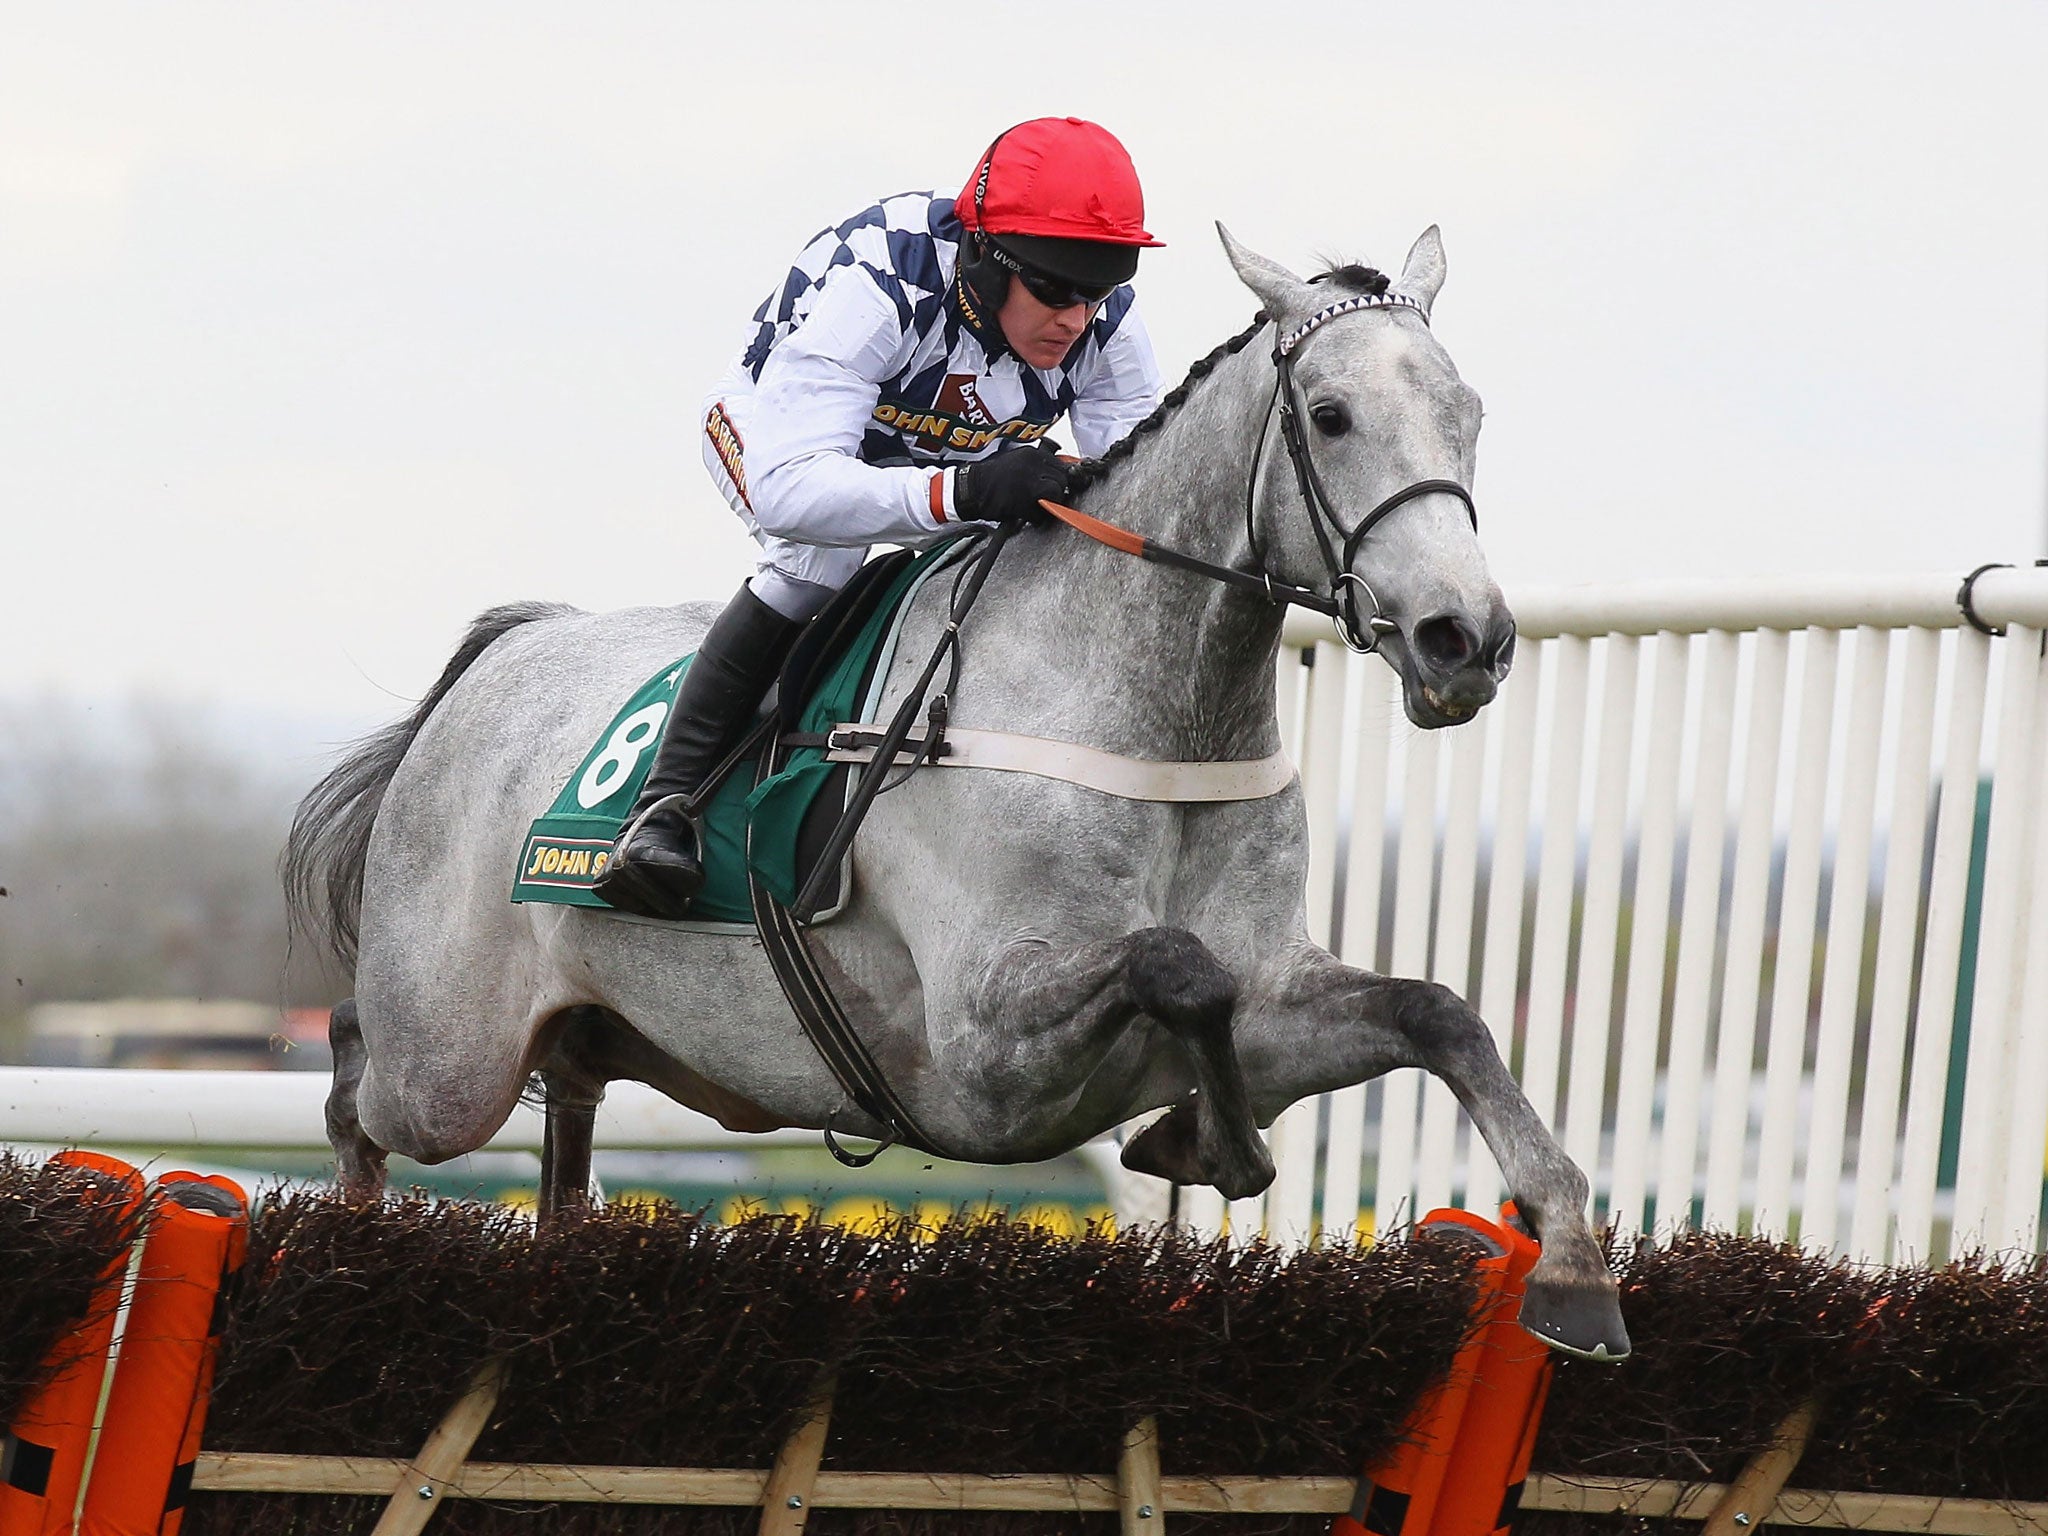 Simonsig is set for a first test on heavy ground at Ascot today